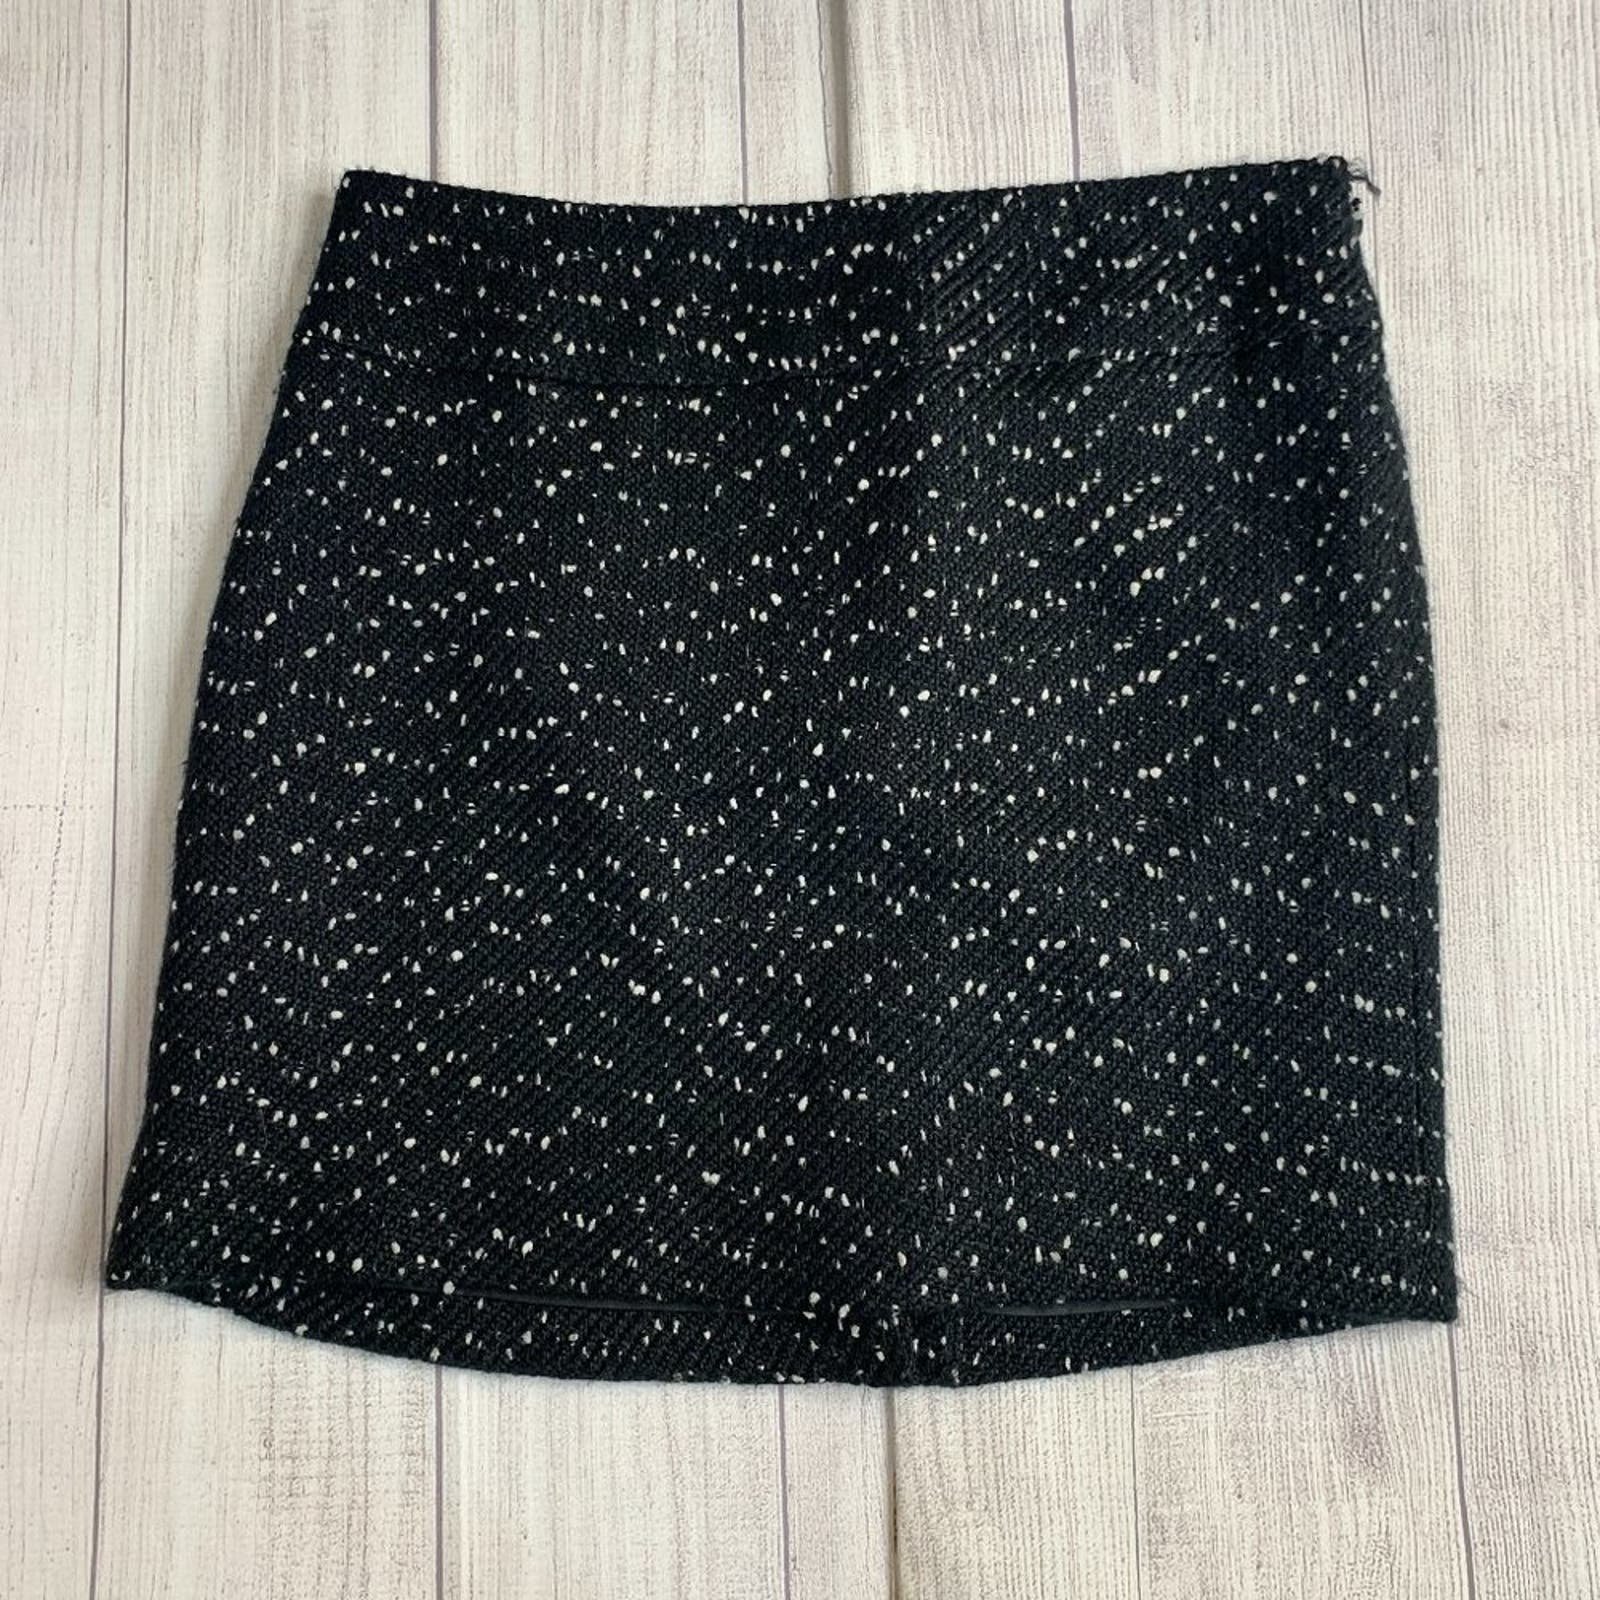 Cheap The Limited Black and White Tweed Mini Skirt Size 4 PRVJozgE3 New Style